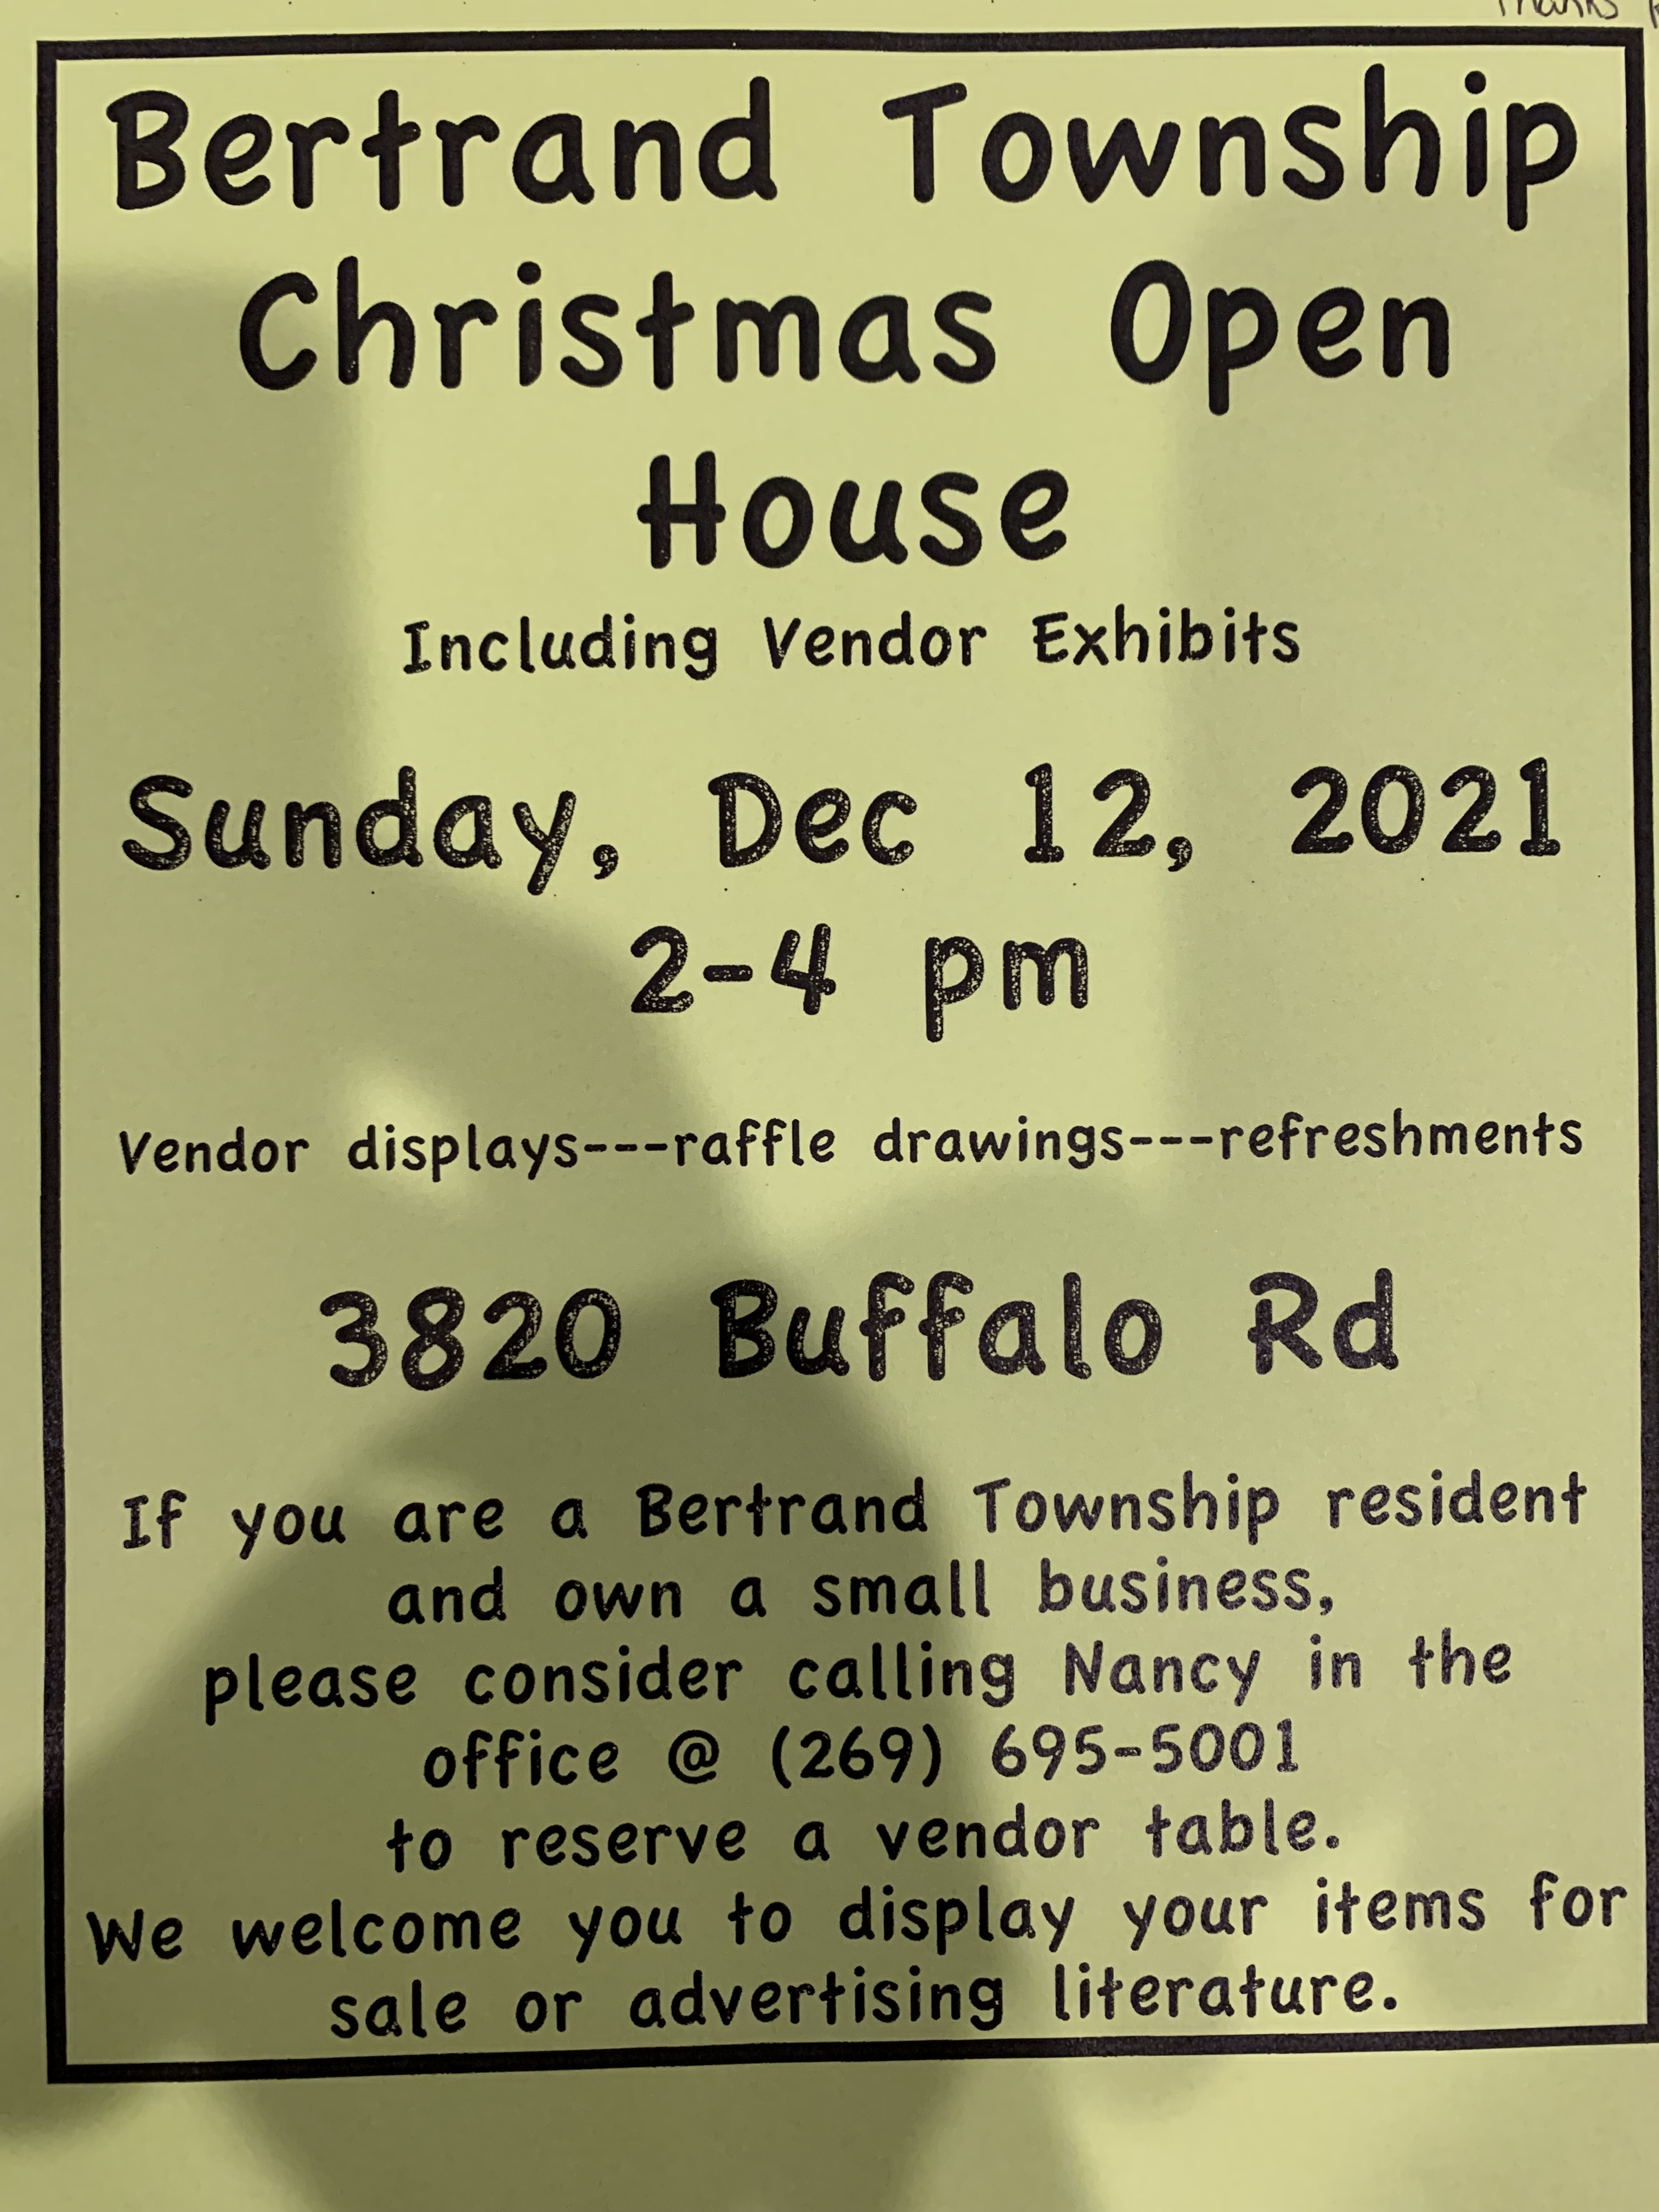 image of flyer for Christmas Open house